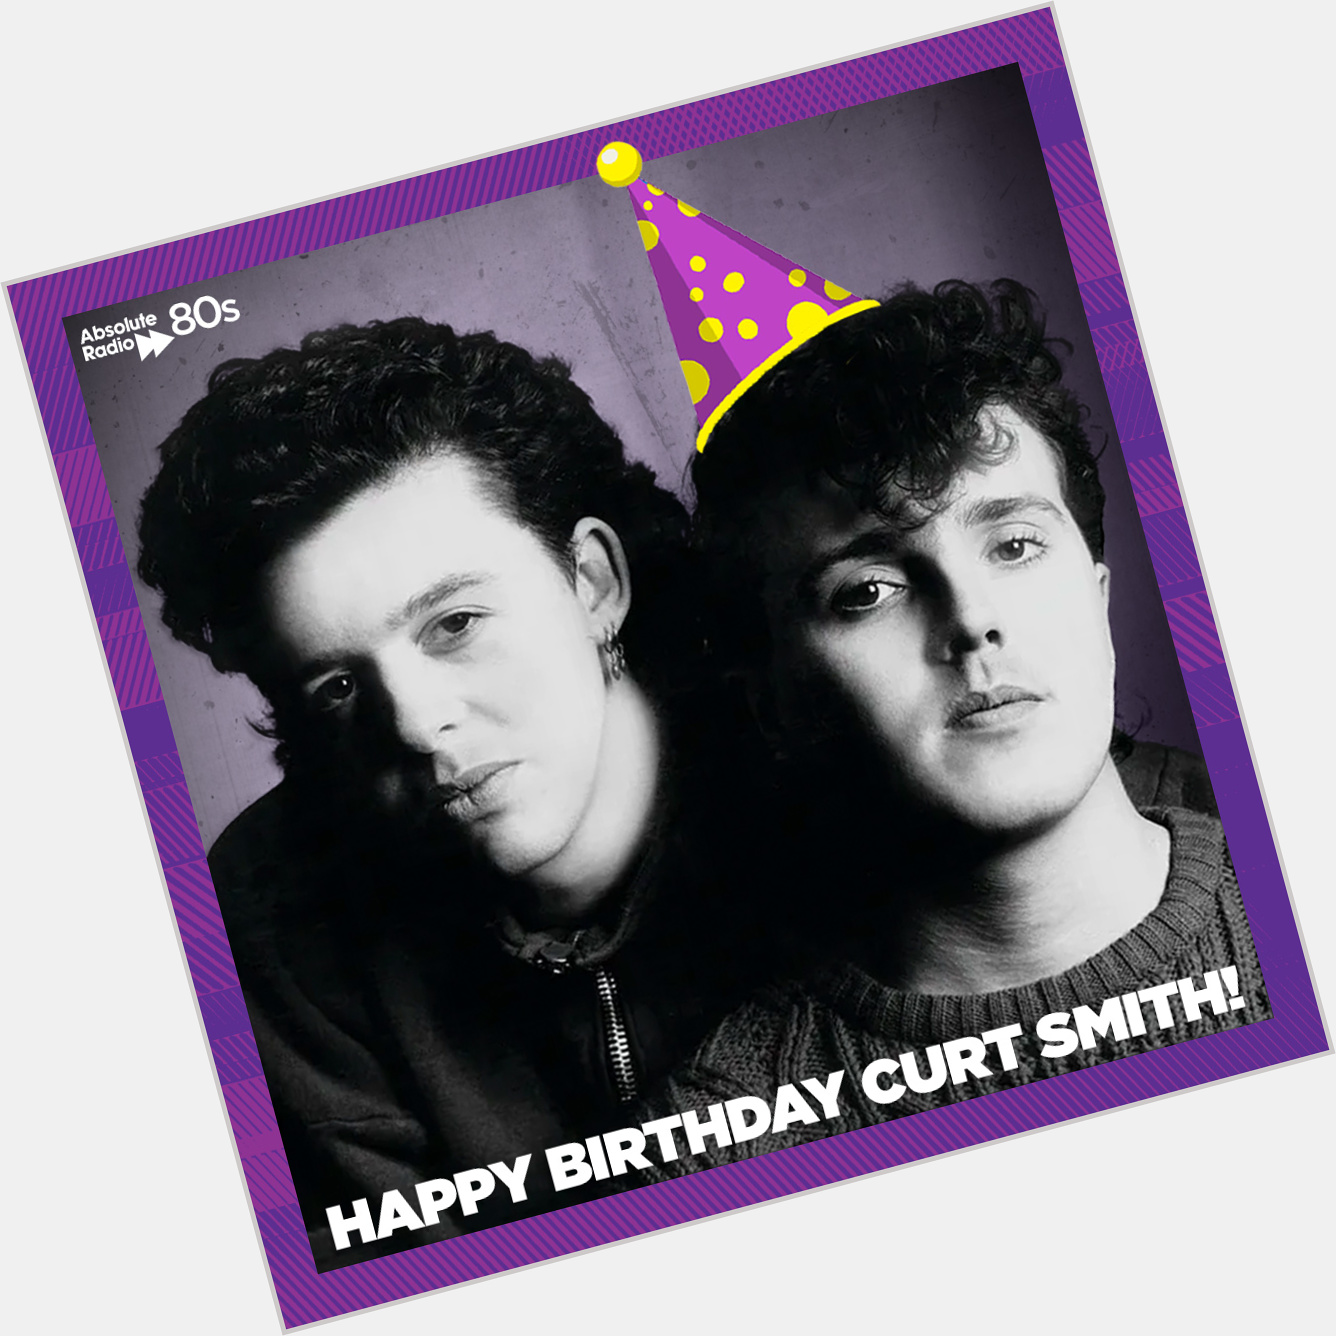 Wishing Curt Smith, co-founder of Tears for Fears a very happy birthday 